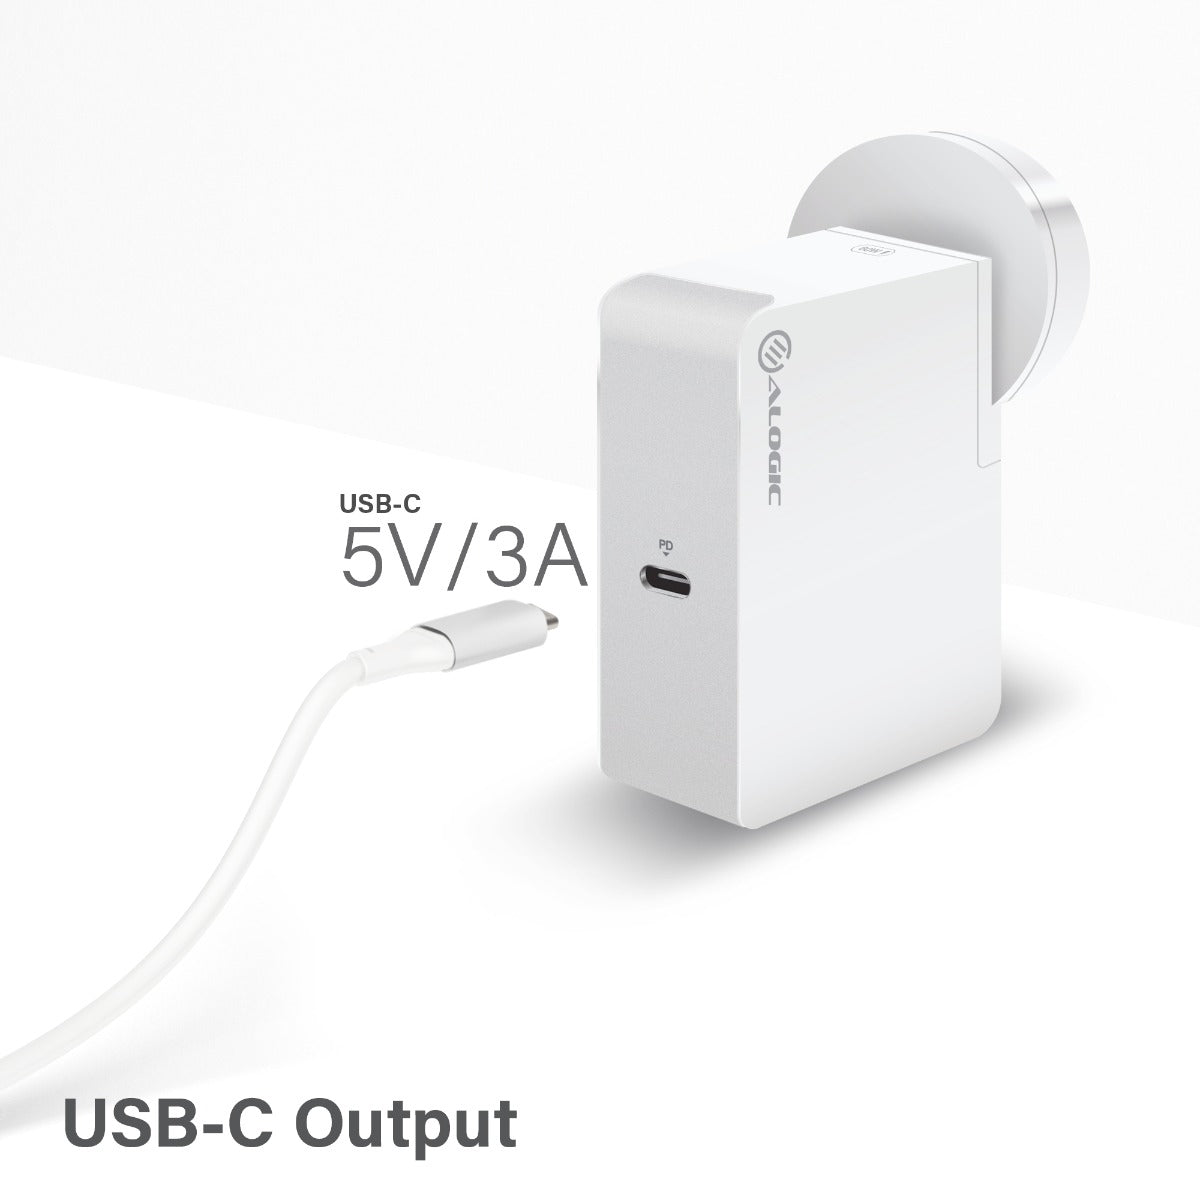 usb-c-laptop-macbook-wall-charger-60w-with-power-deliverya-travel-edition-with-au-eu-uk-us-plugs-and-2m-cable_7